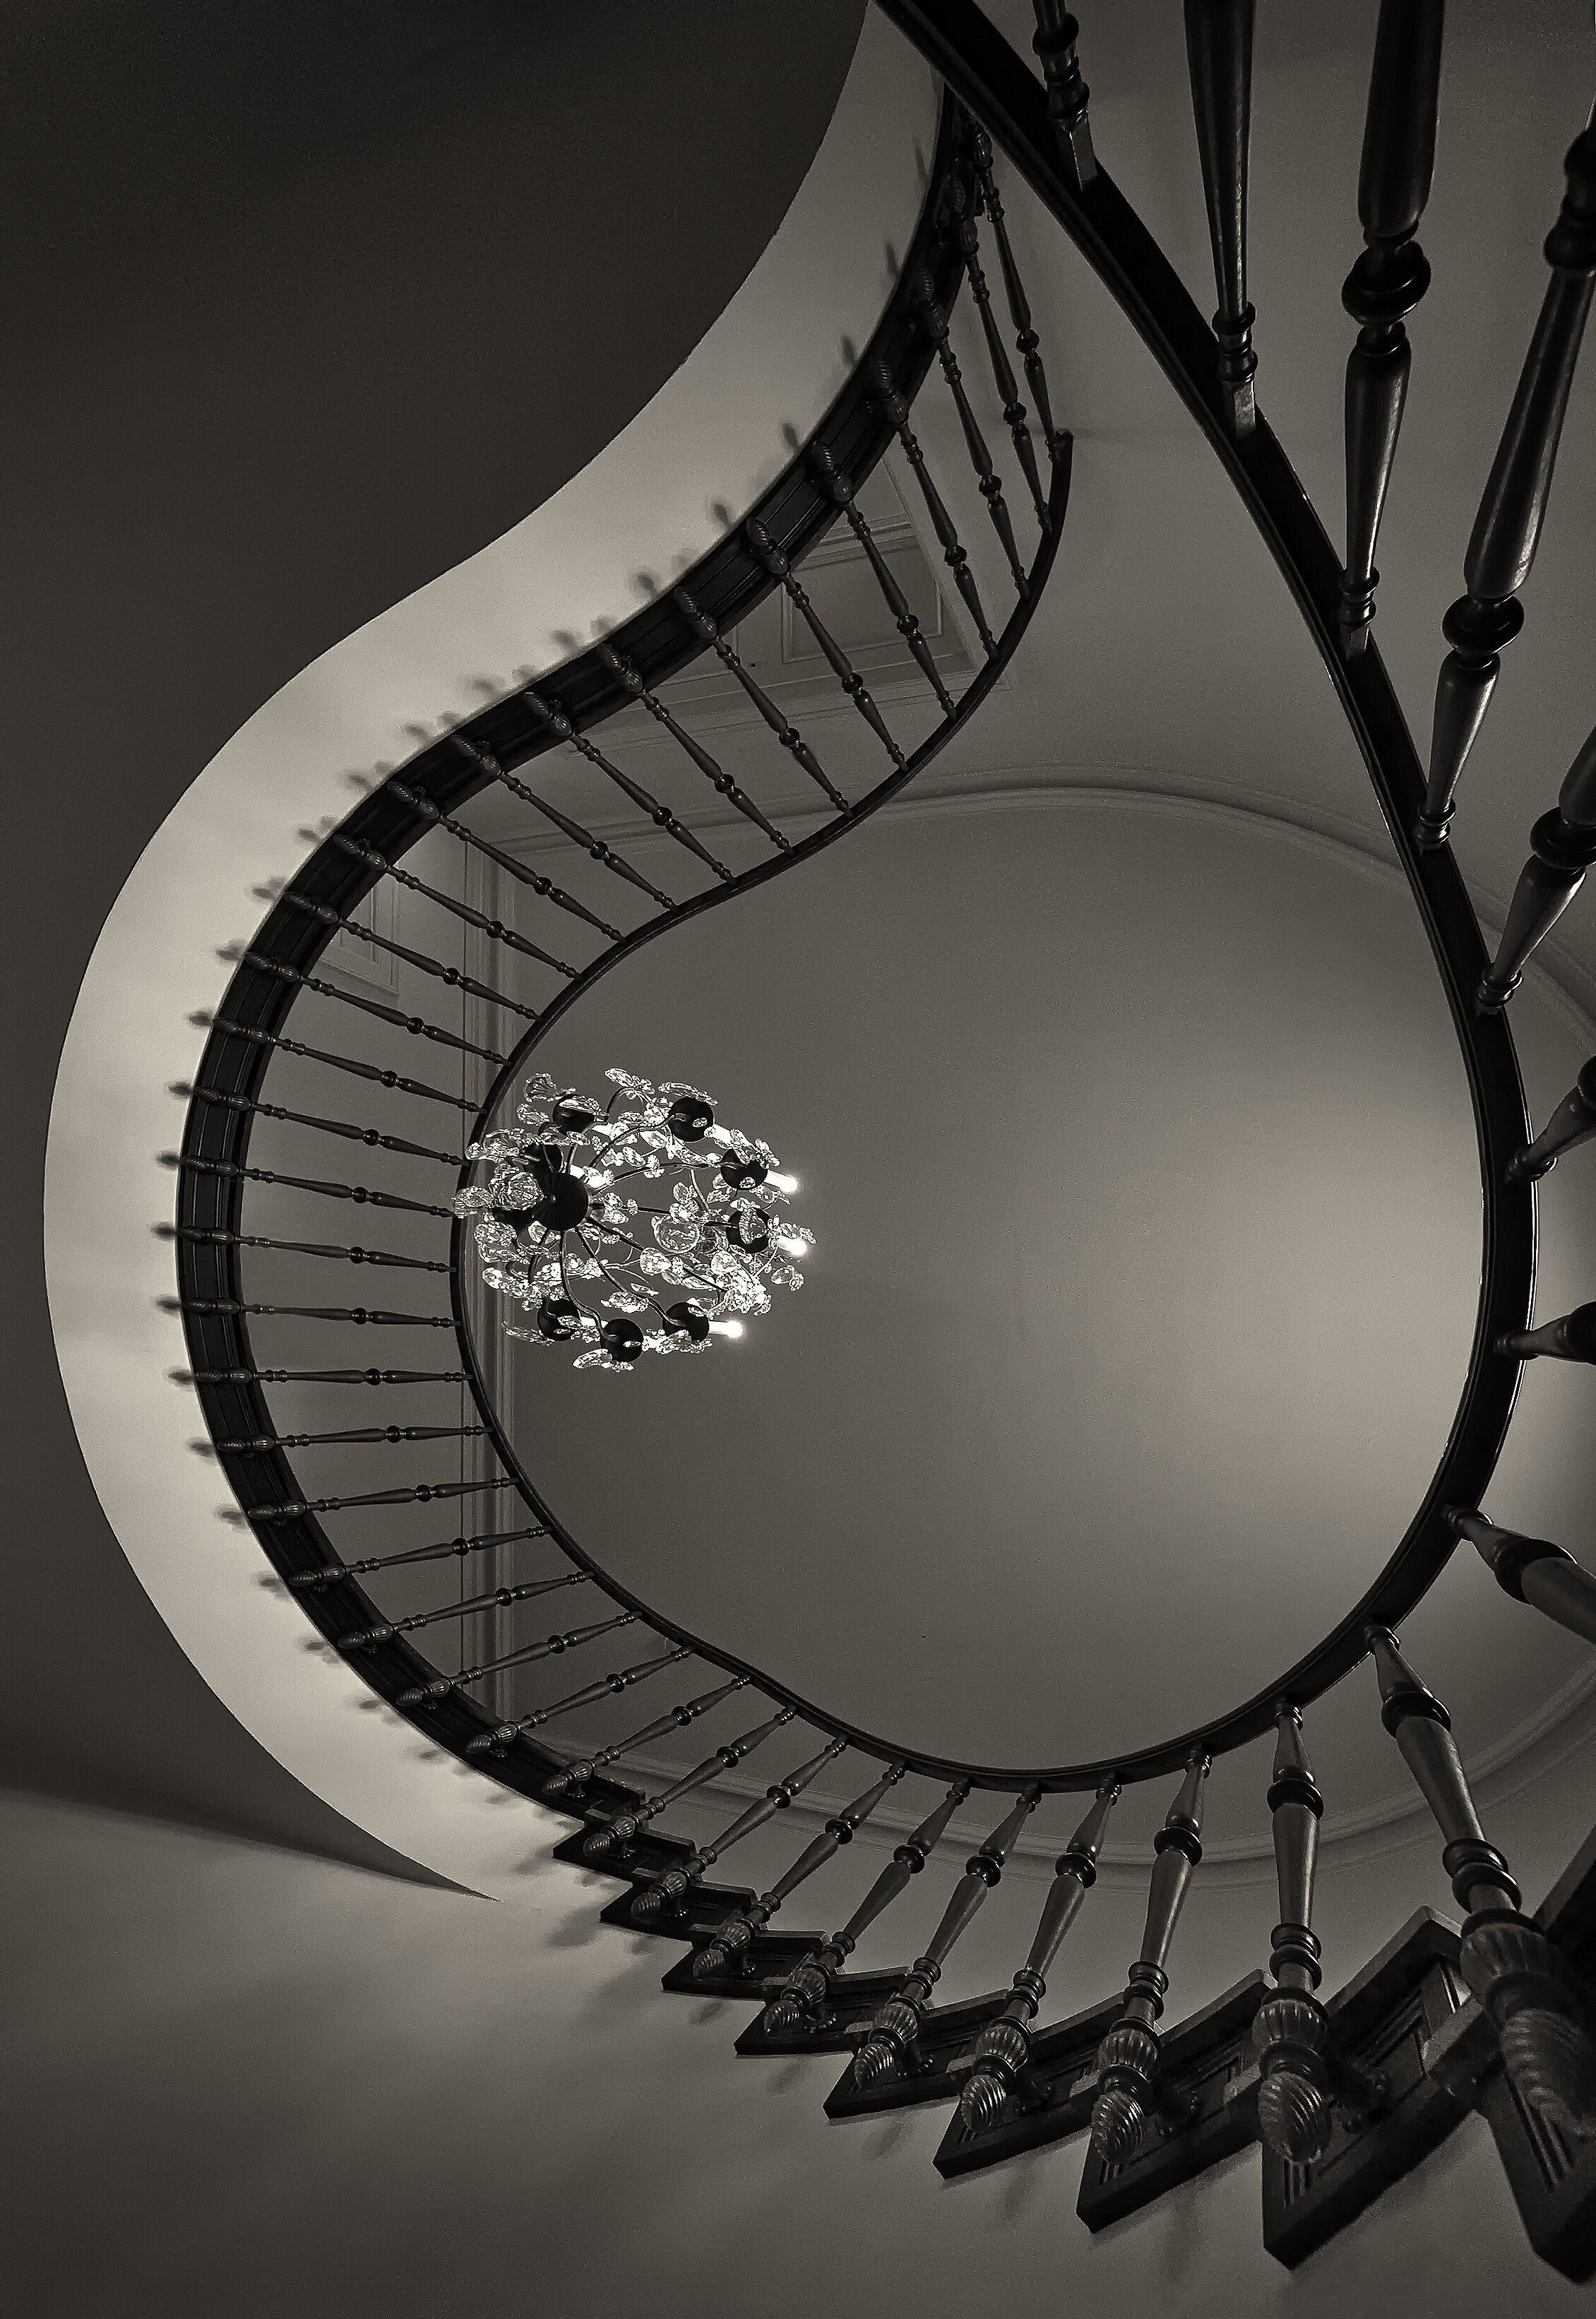  Charles_Yang_S_O_BW_An Imperfect Staircase 